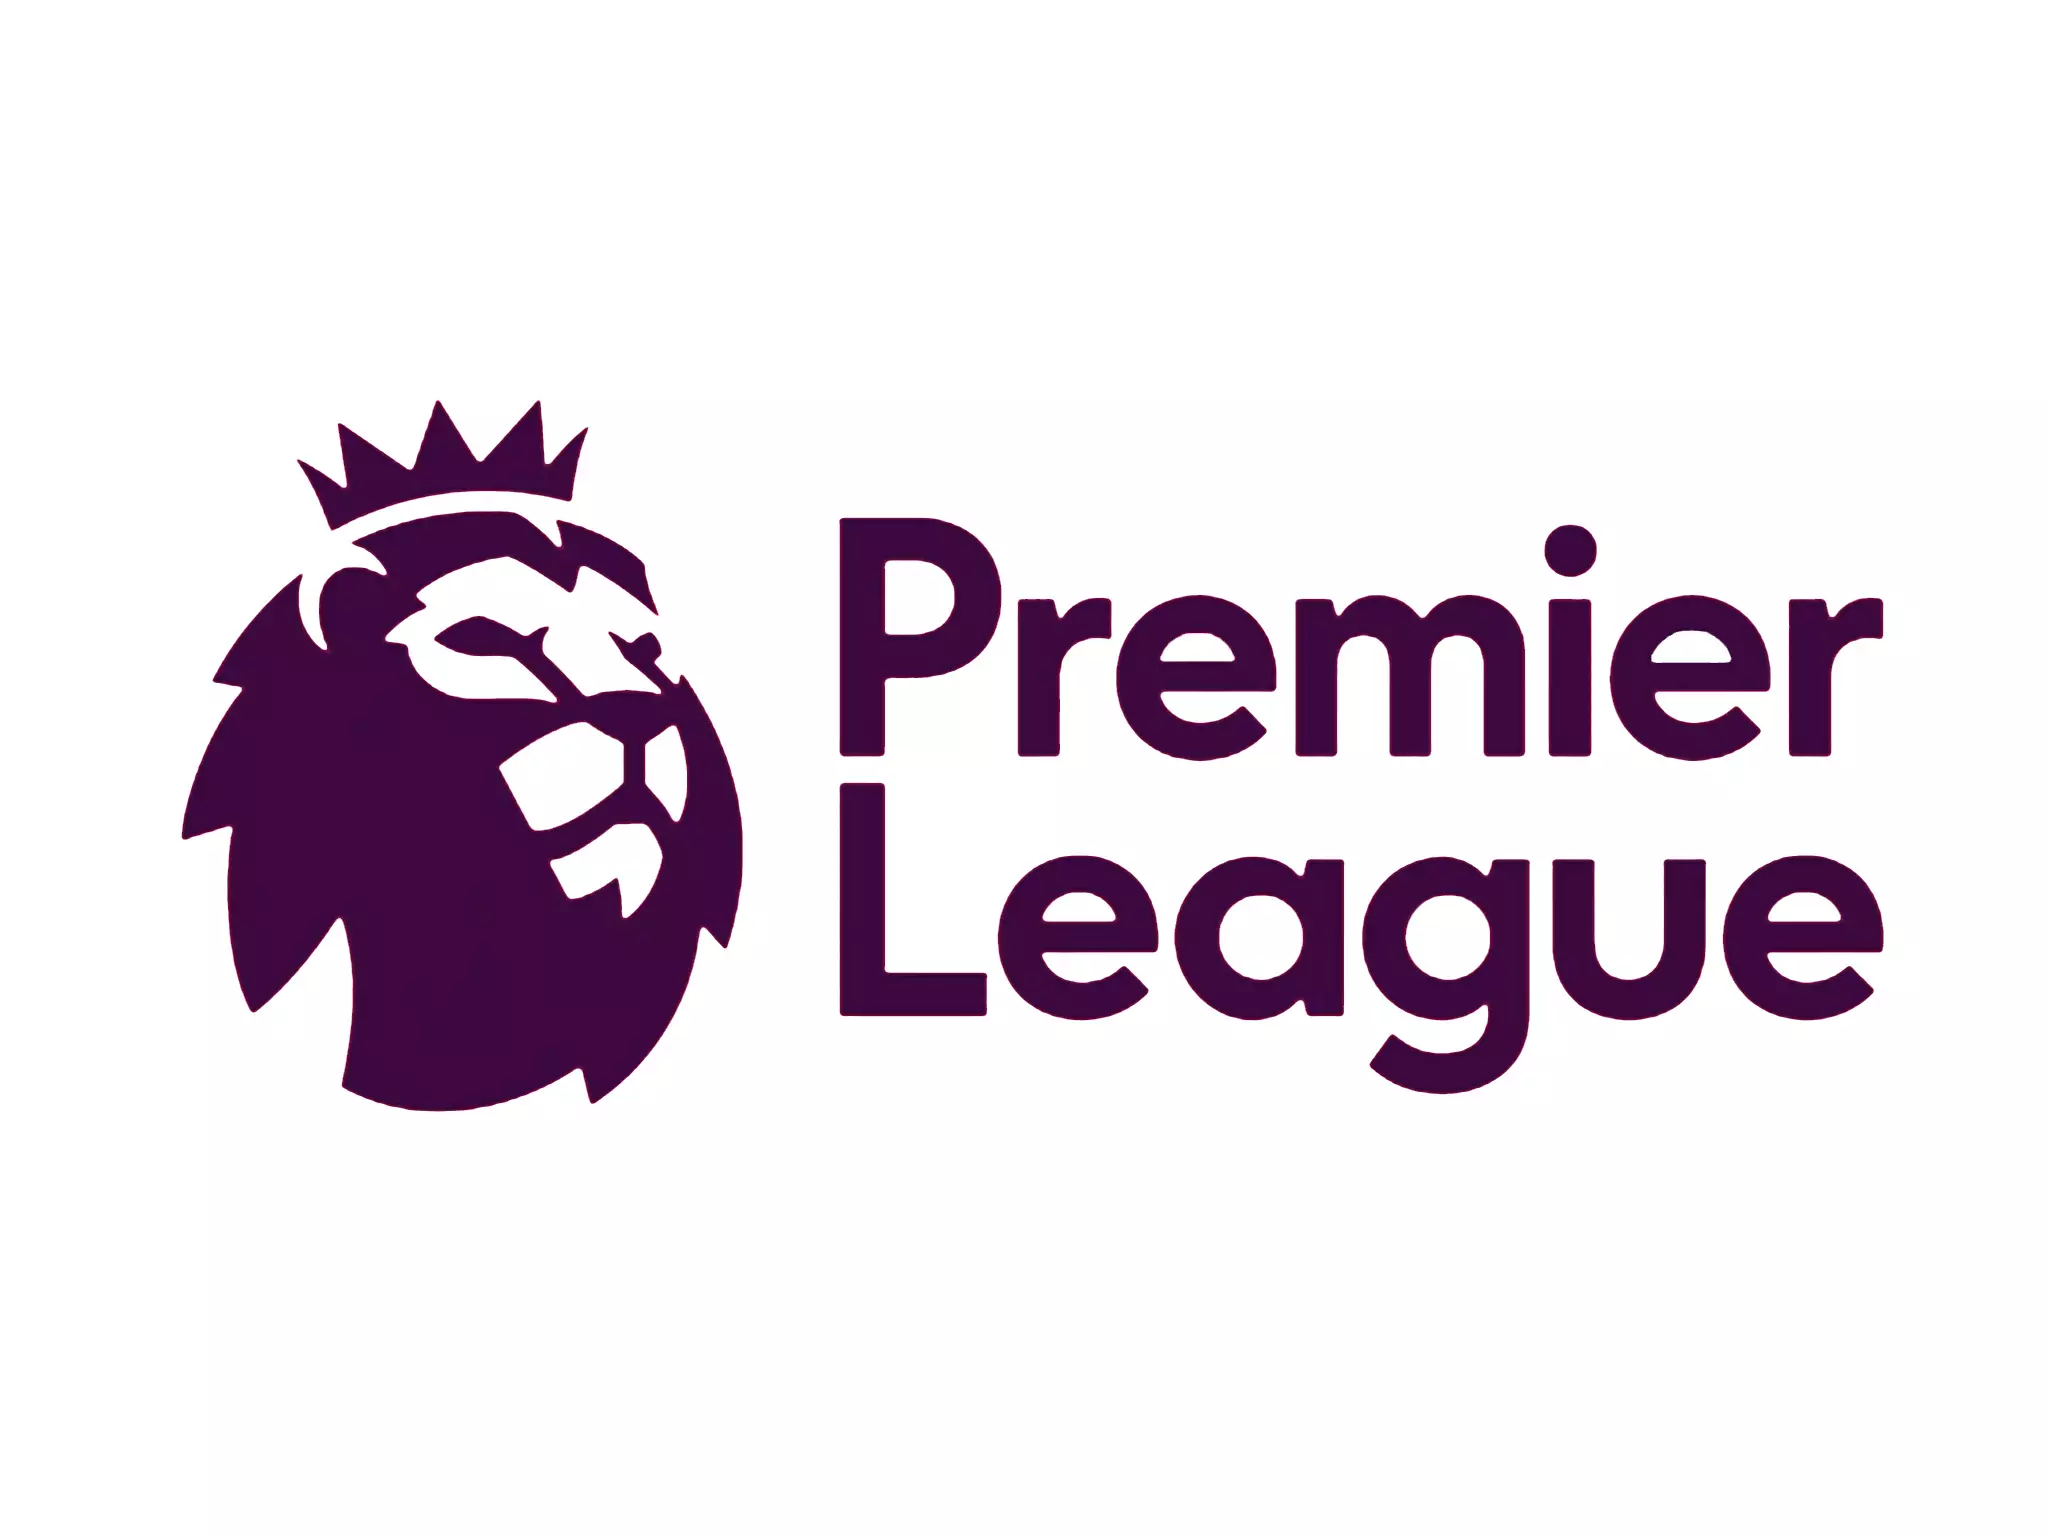 Younger Brother Joins Big Brother In The Premier League 